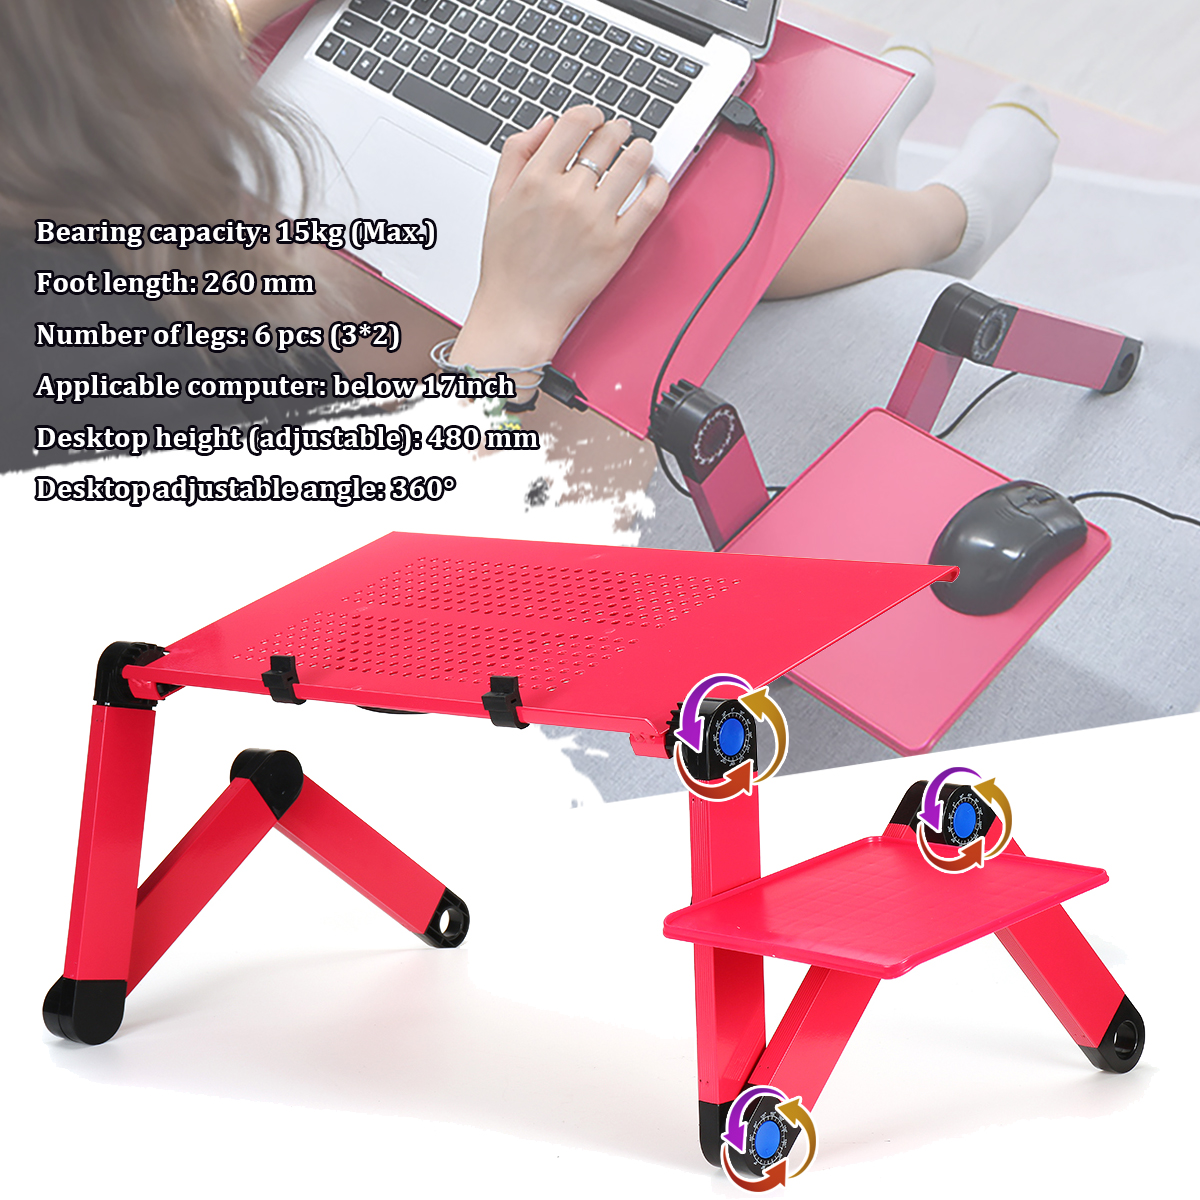 Adjustable-Laptop-Stand-Desk-Notebook-Bracket-Fan-Cooling-Pad-Game-Notebook-Base-with-Mouse-Board-fo-1757095-4